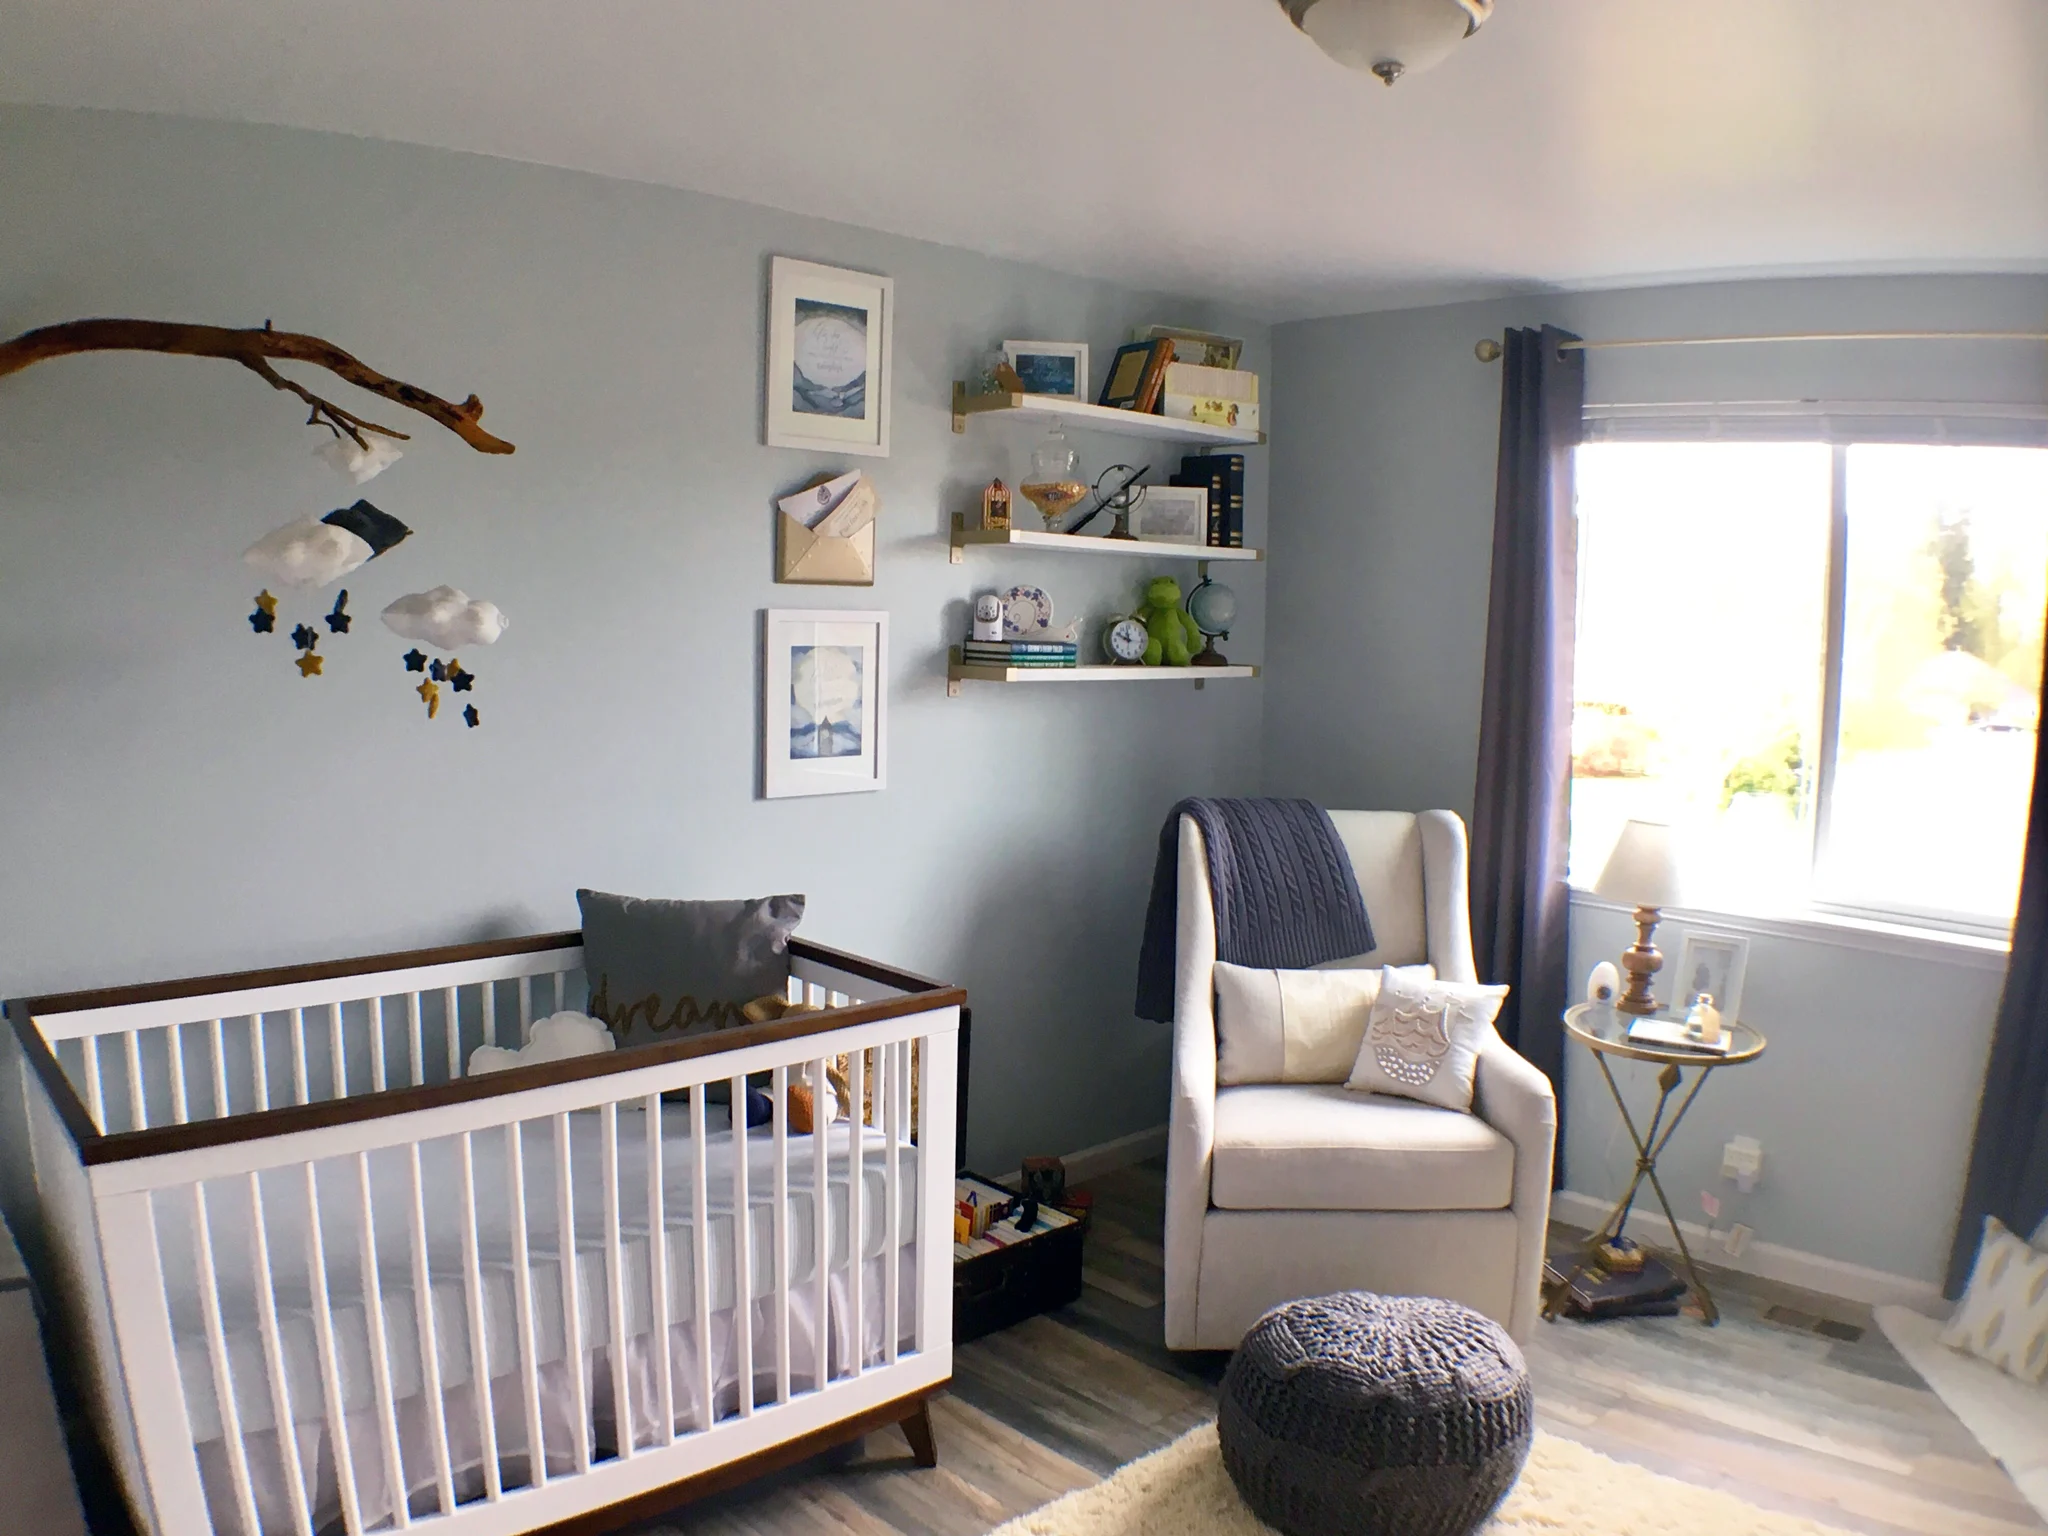 Delaney’s Magical, Story-Themed Nursery - Project Nursery